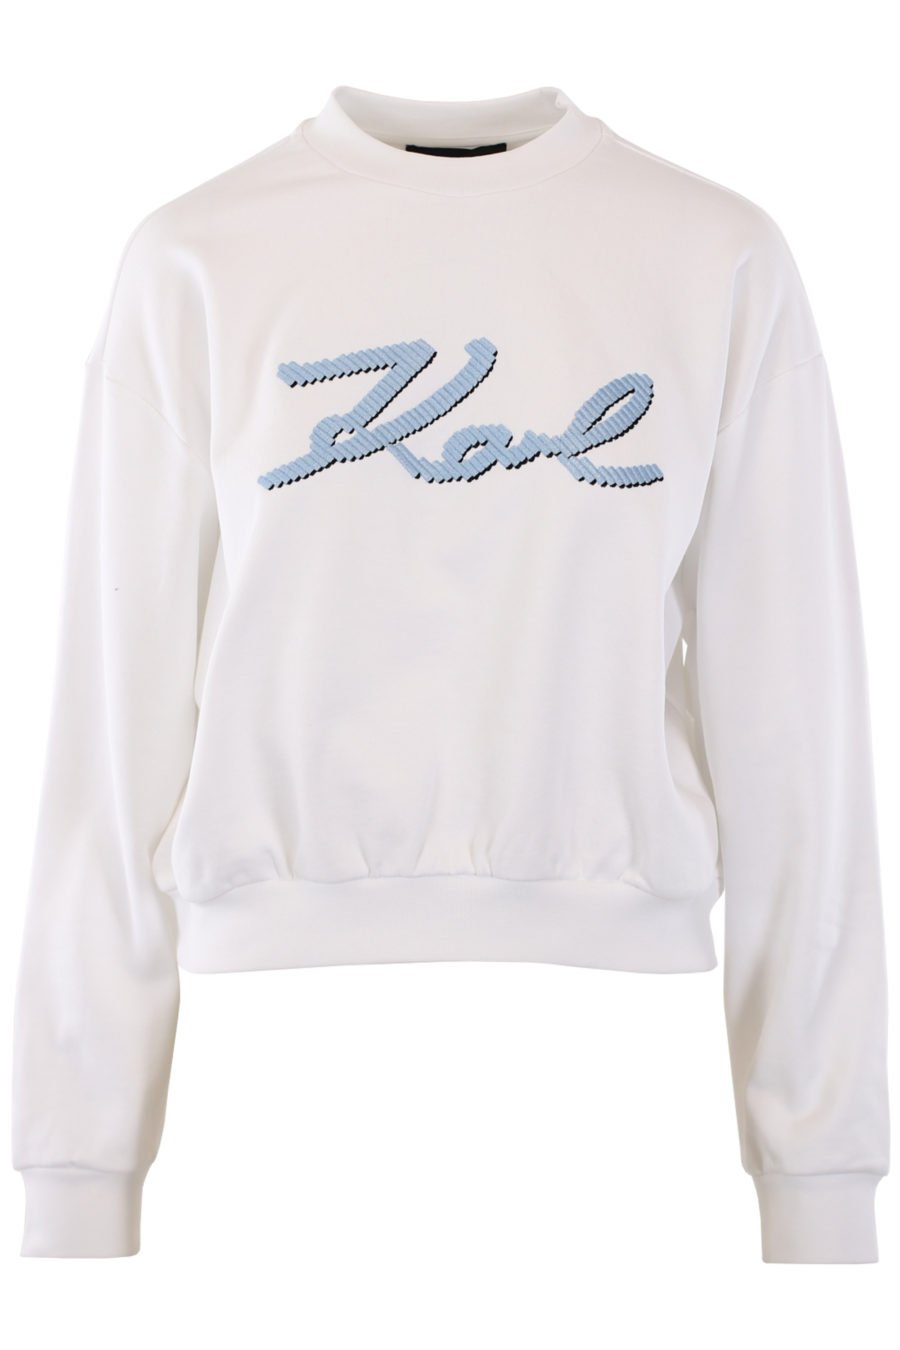 White sweatshirt with blue embroidered logo - IMG 0833